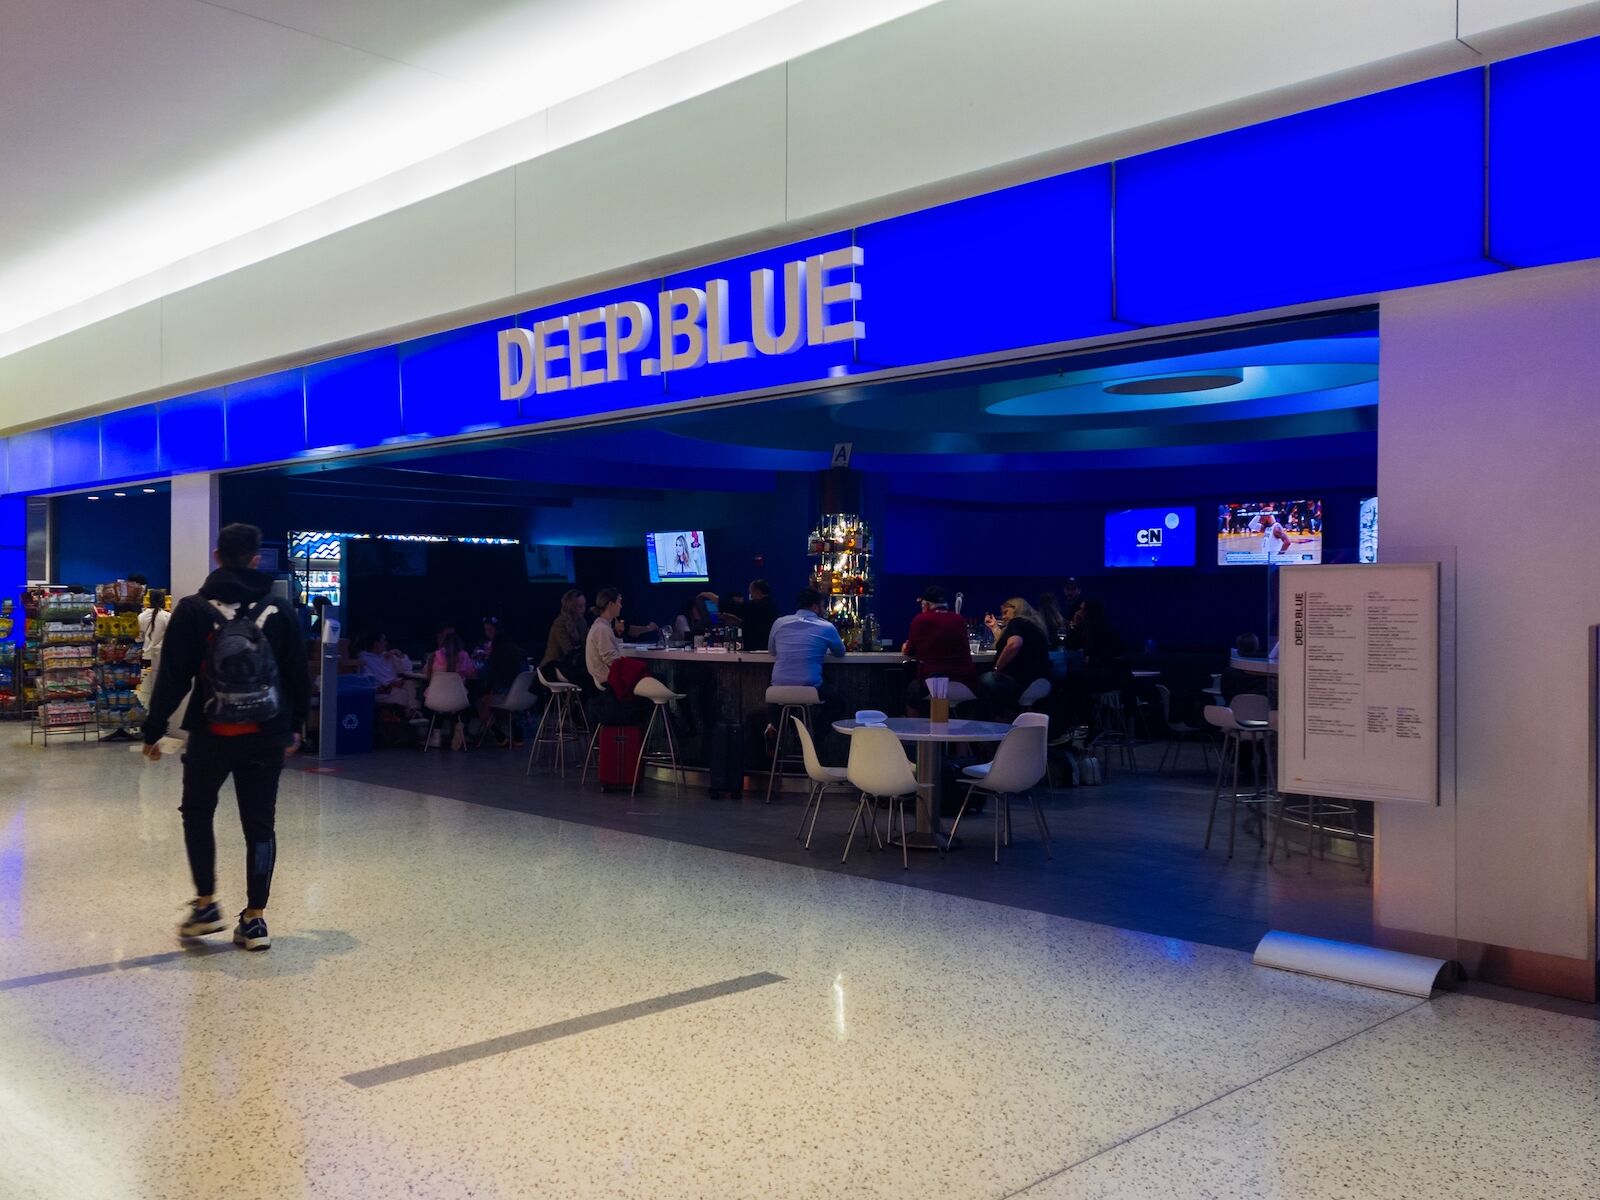 The best airport food is at this restaurant, Deep Blue in JFK airport